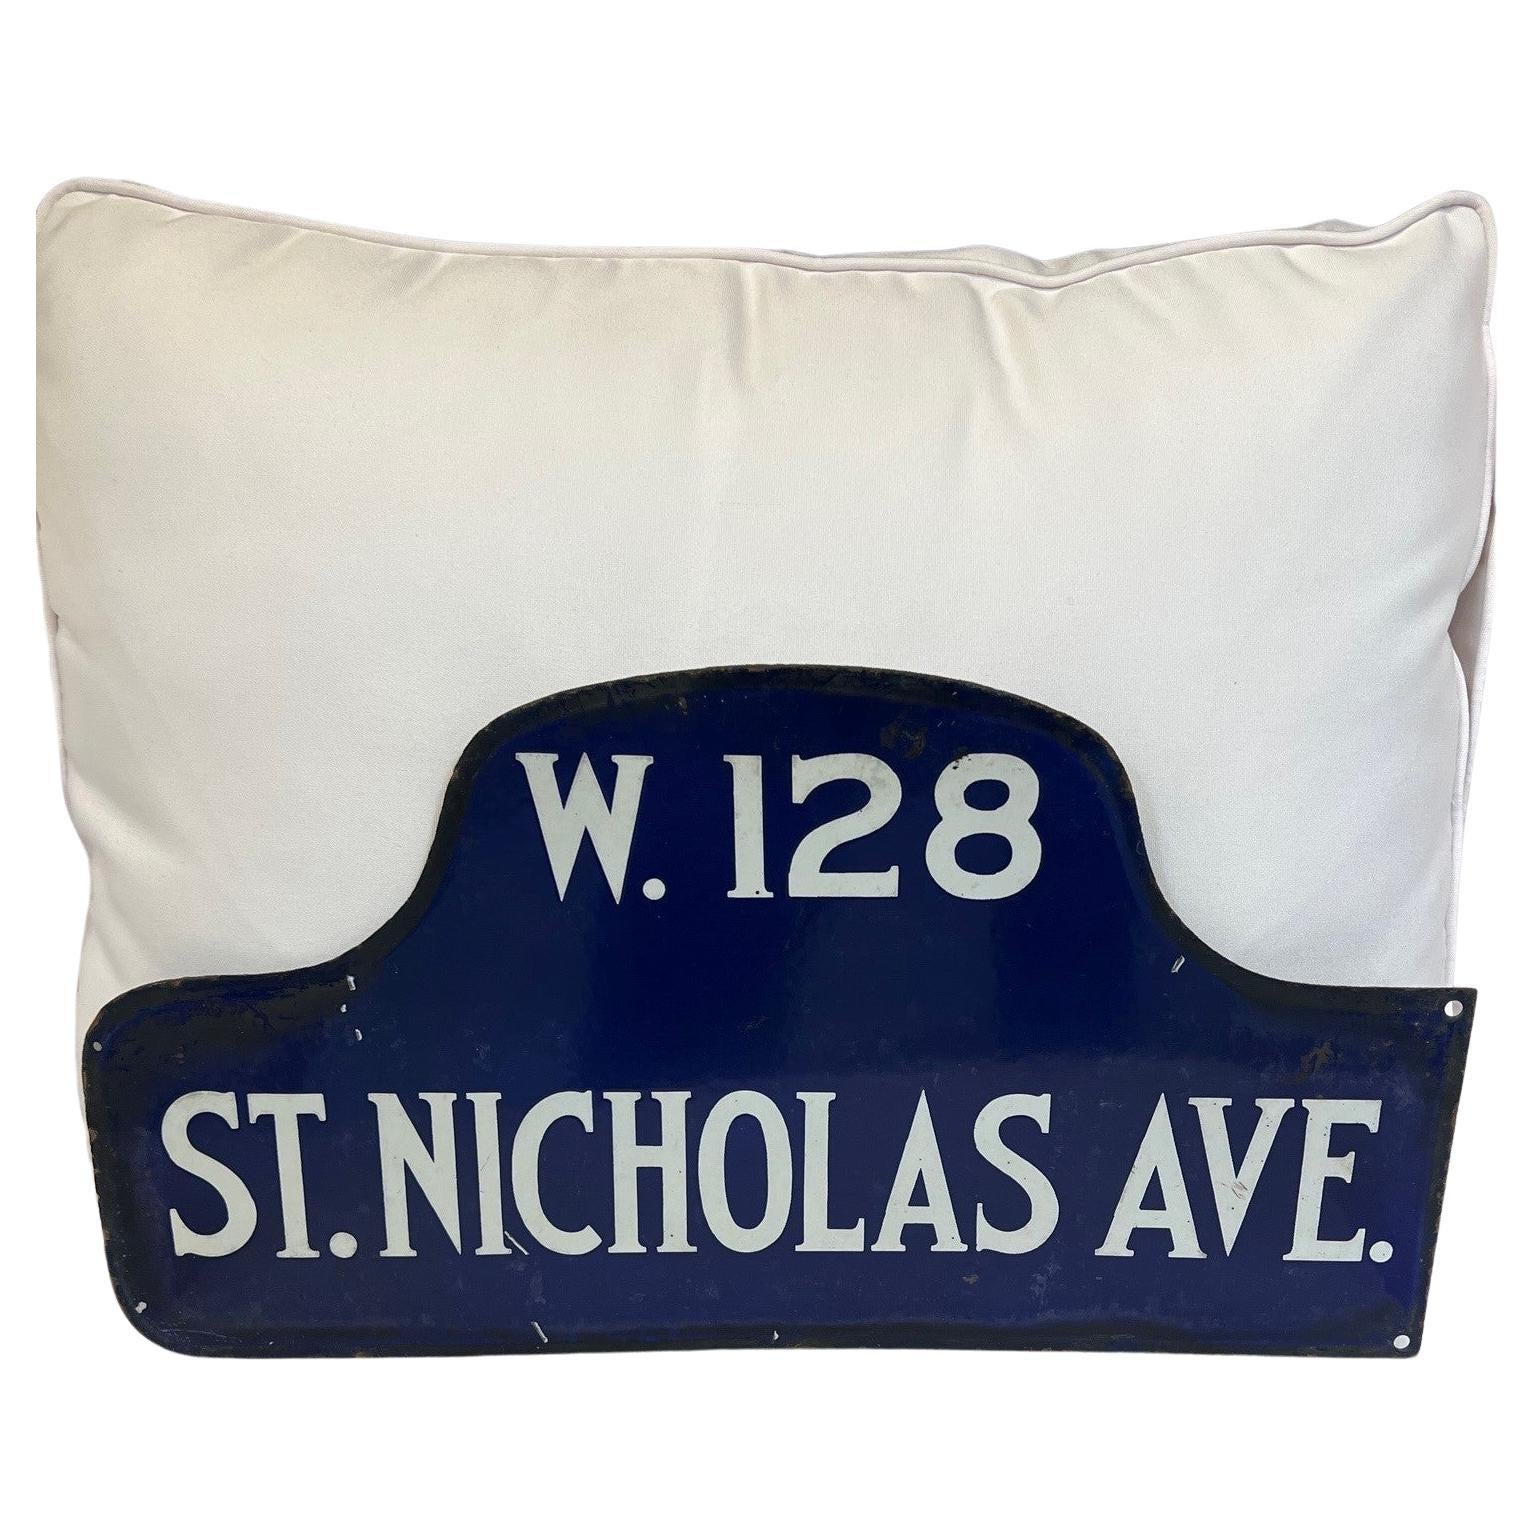 Antique porcelain double sided humpback New York City Street Sign used in NYC from 1910 till early 1970s. Cobalt blue enamel and white enamel all original in very good condition for its age and use. Sign says W.128 on top of St. Nicholas Ave. two